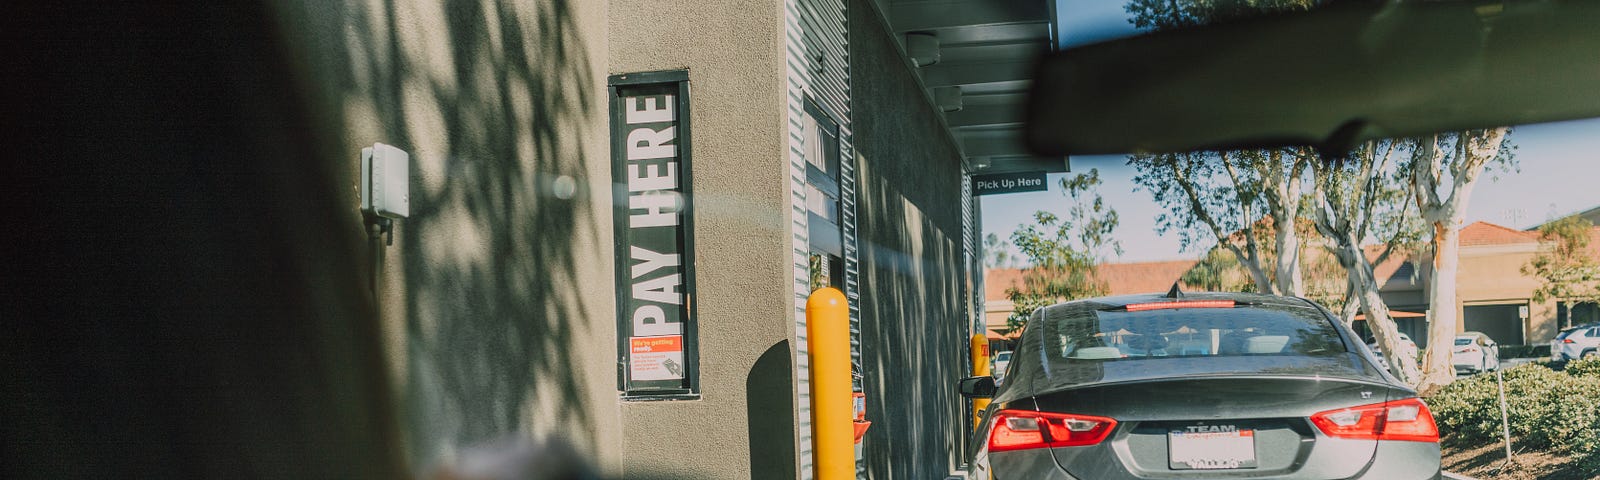 Veiwed from the rear seat. We see a women waiting in line at a drive thru resturant. The caption below reads “Get used to the view it’s probably going to cost you your job.” (Credit https://www.pexels.com/@rodnae-prod/)